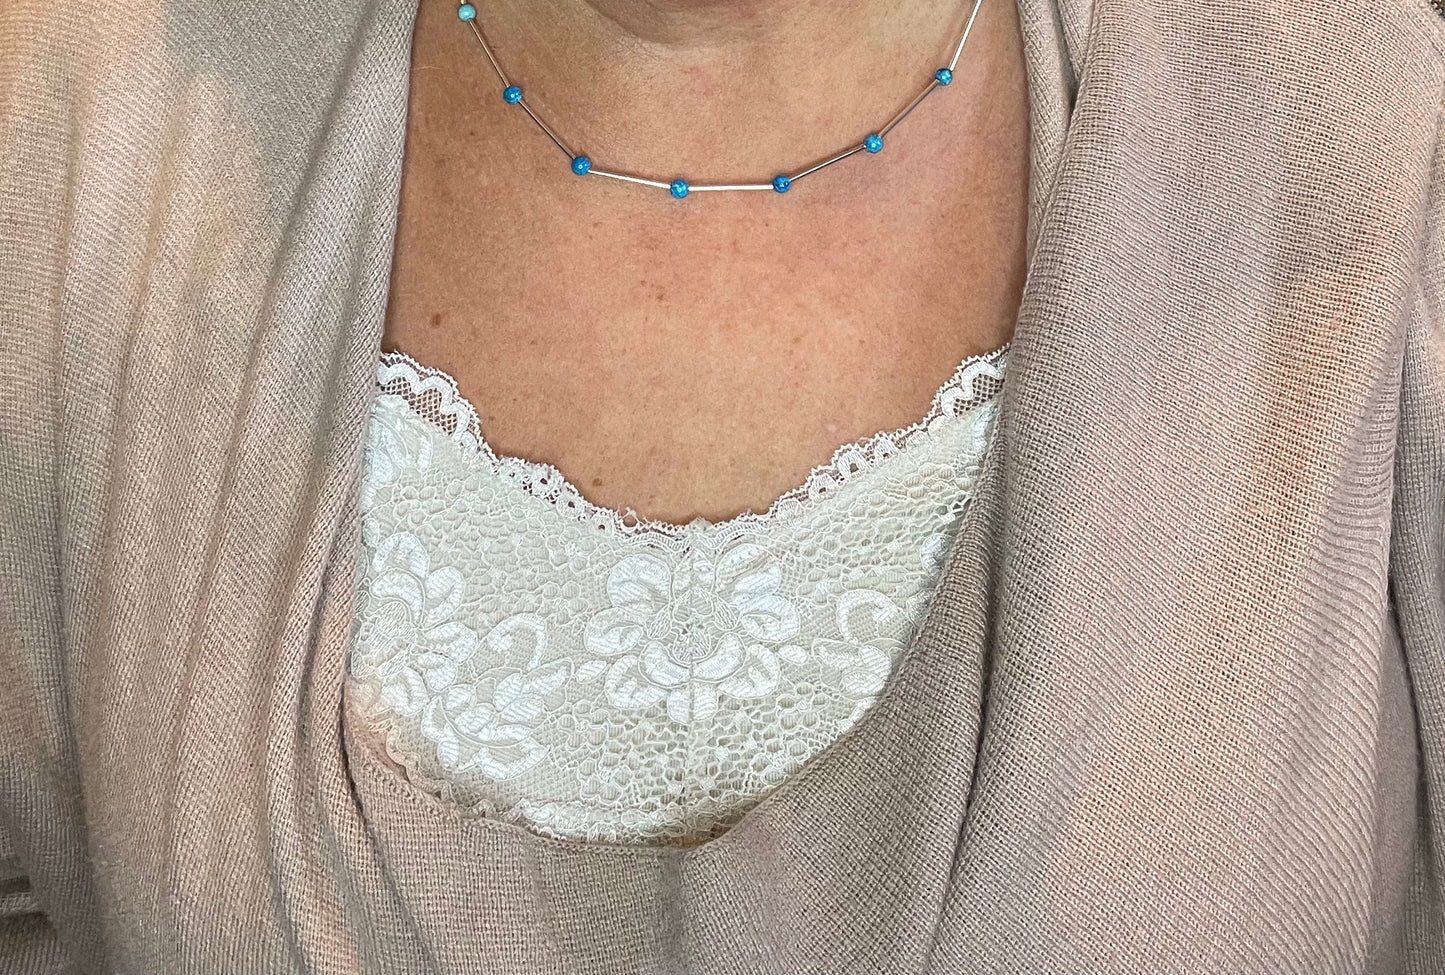 Wire & turquoise bead necklace